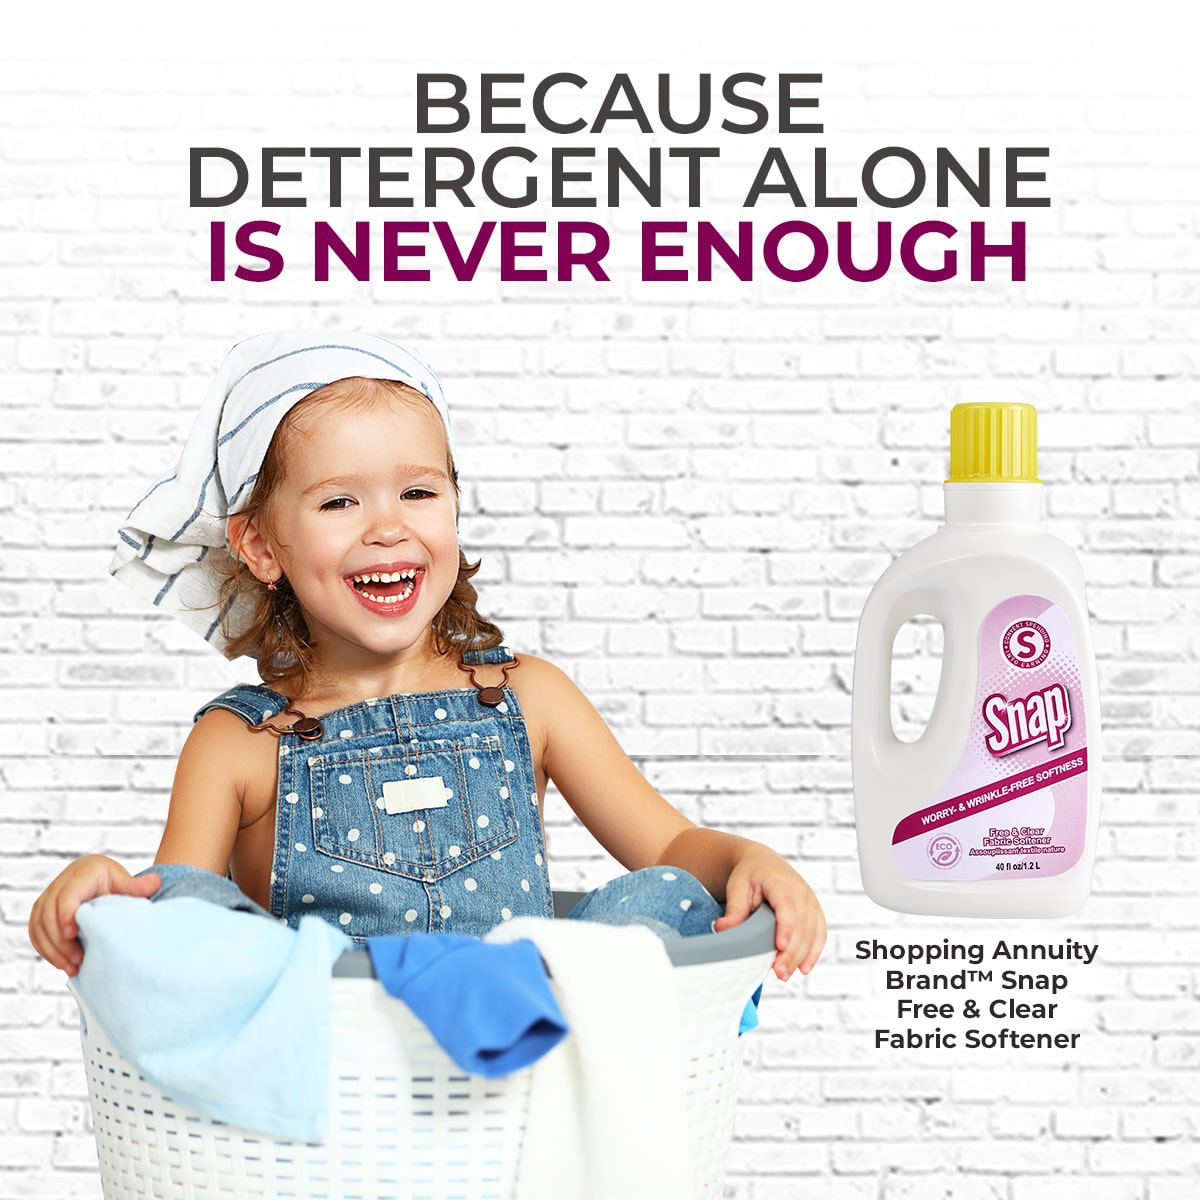 What Makes Shopping Annuity Brand Snap Free & Clear Fabric Softener Unique?